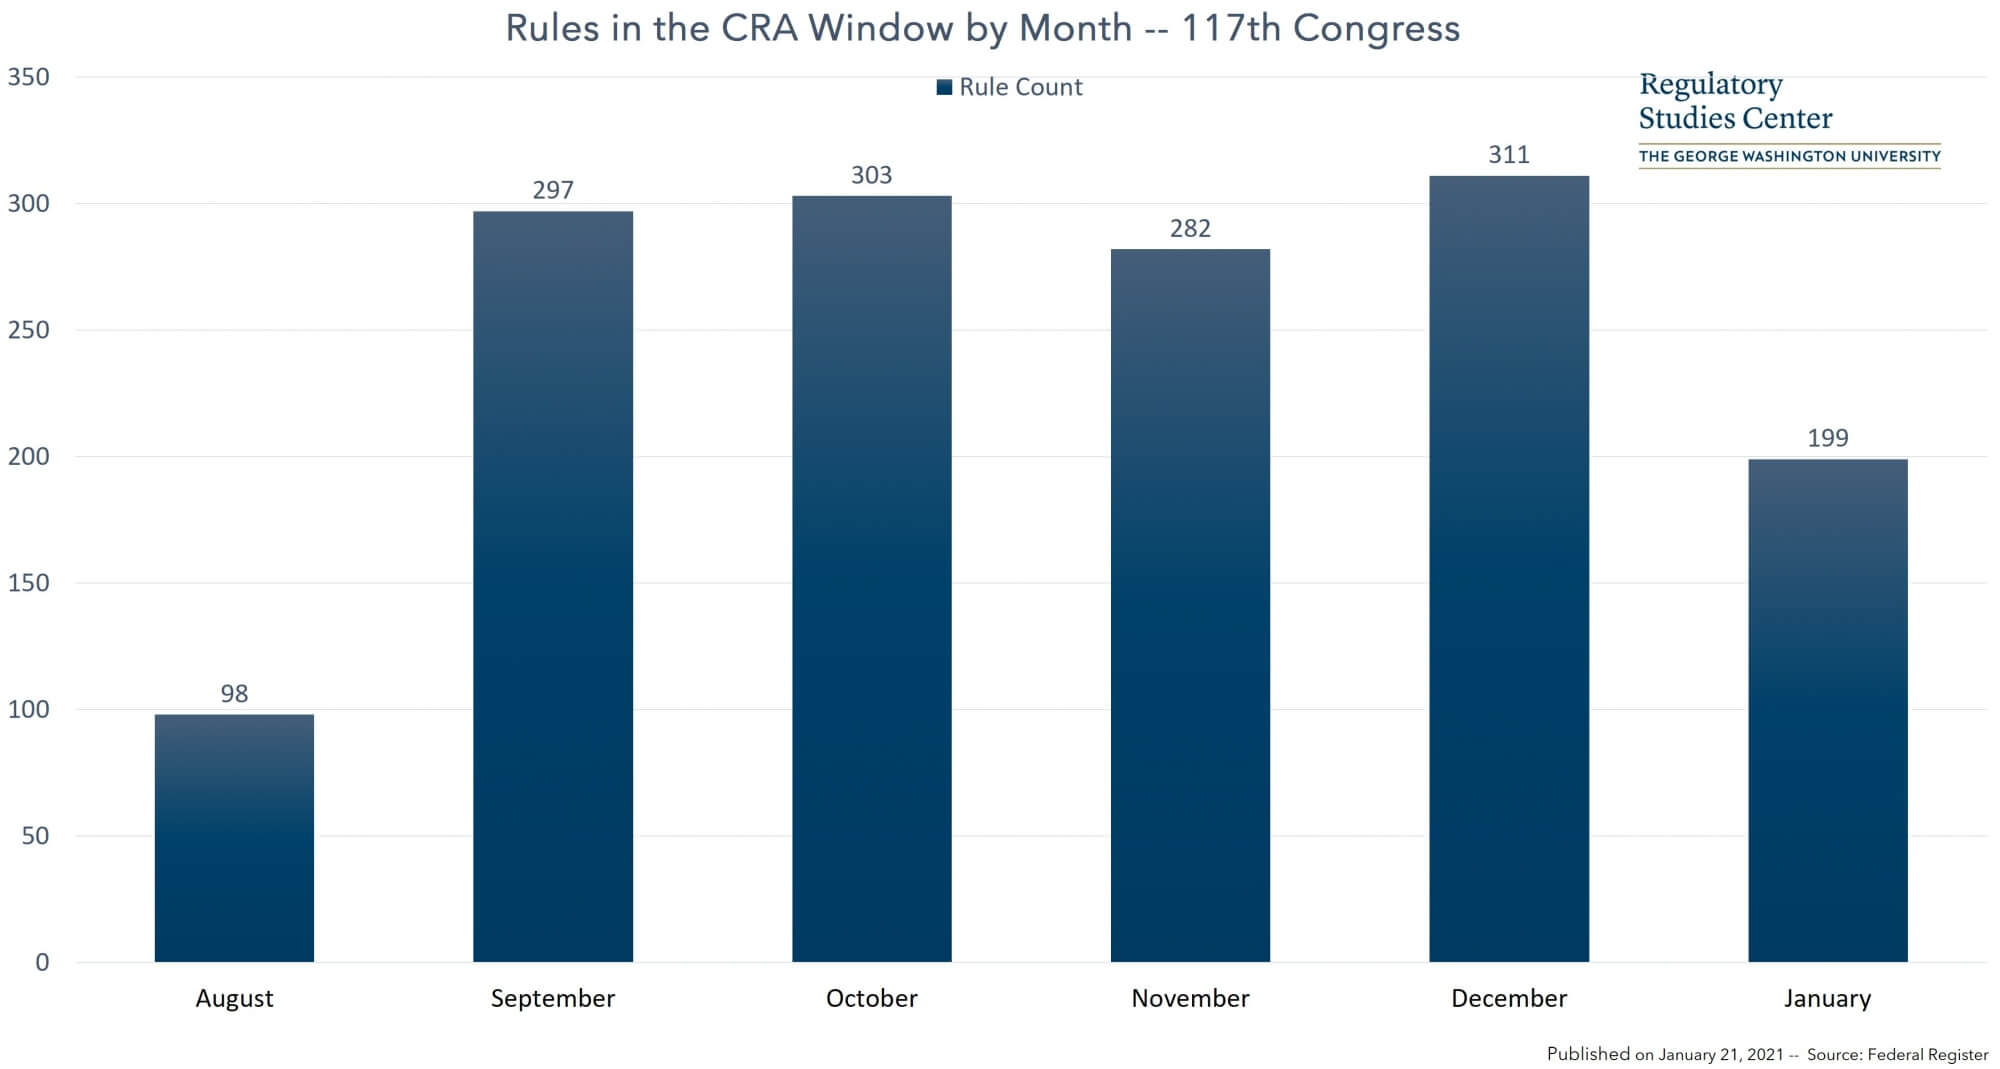 Chart of CRA rules published by month.